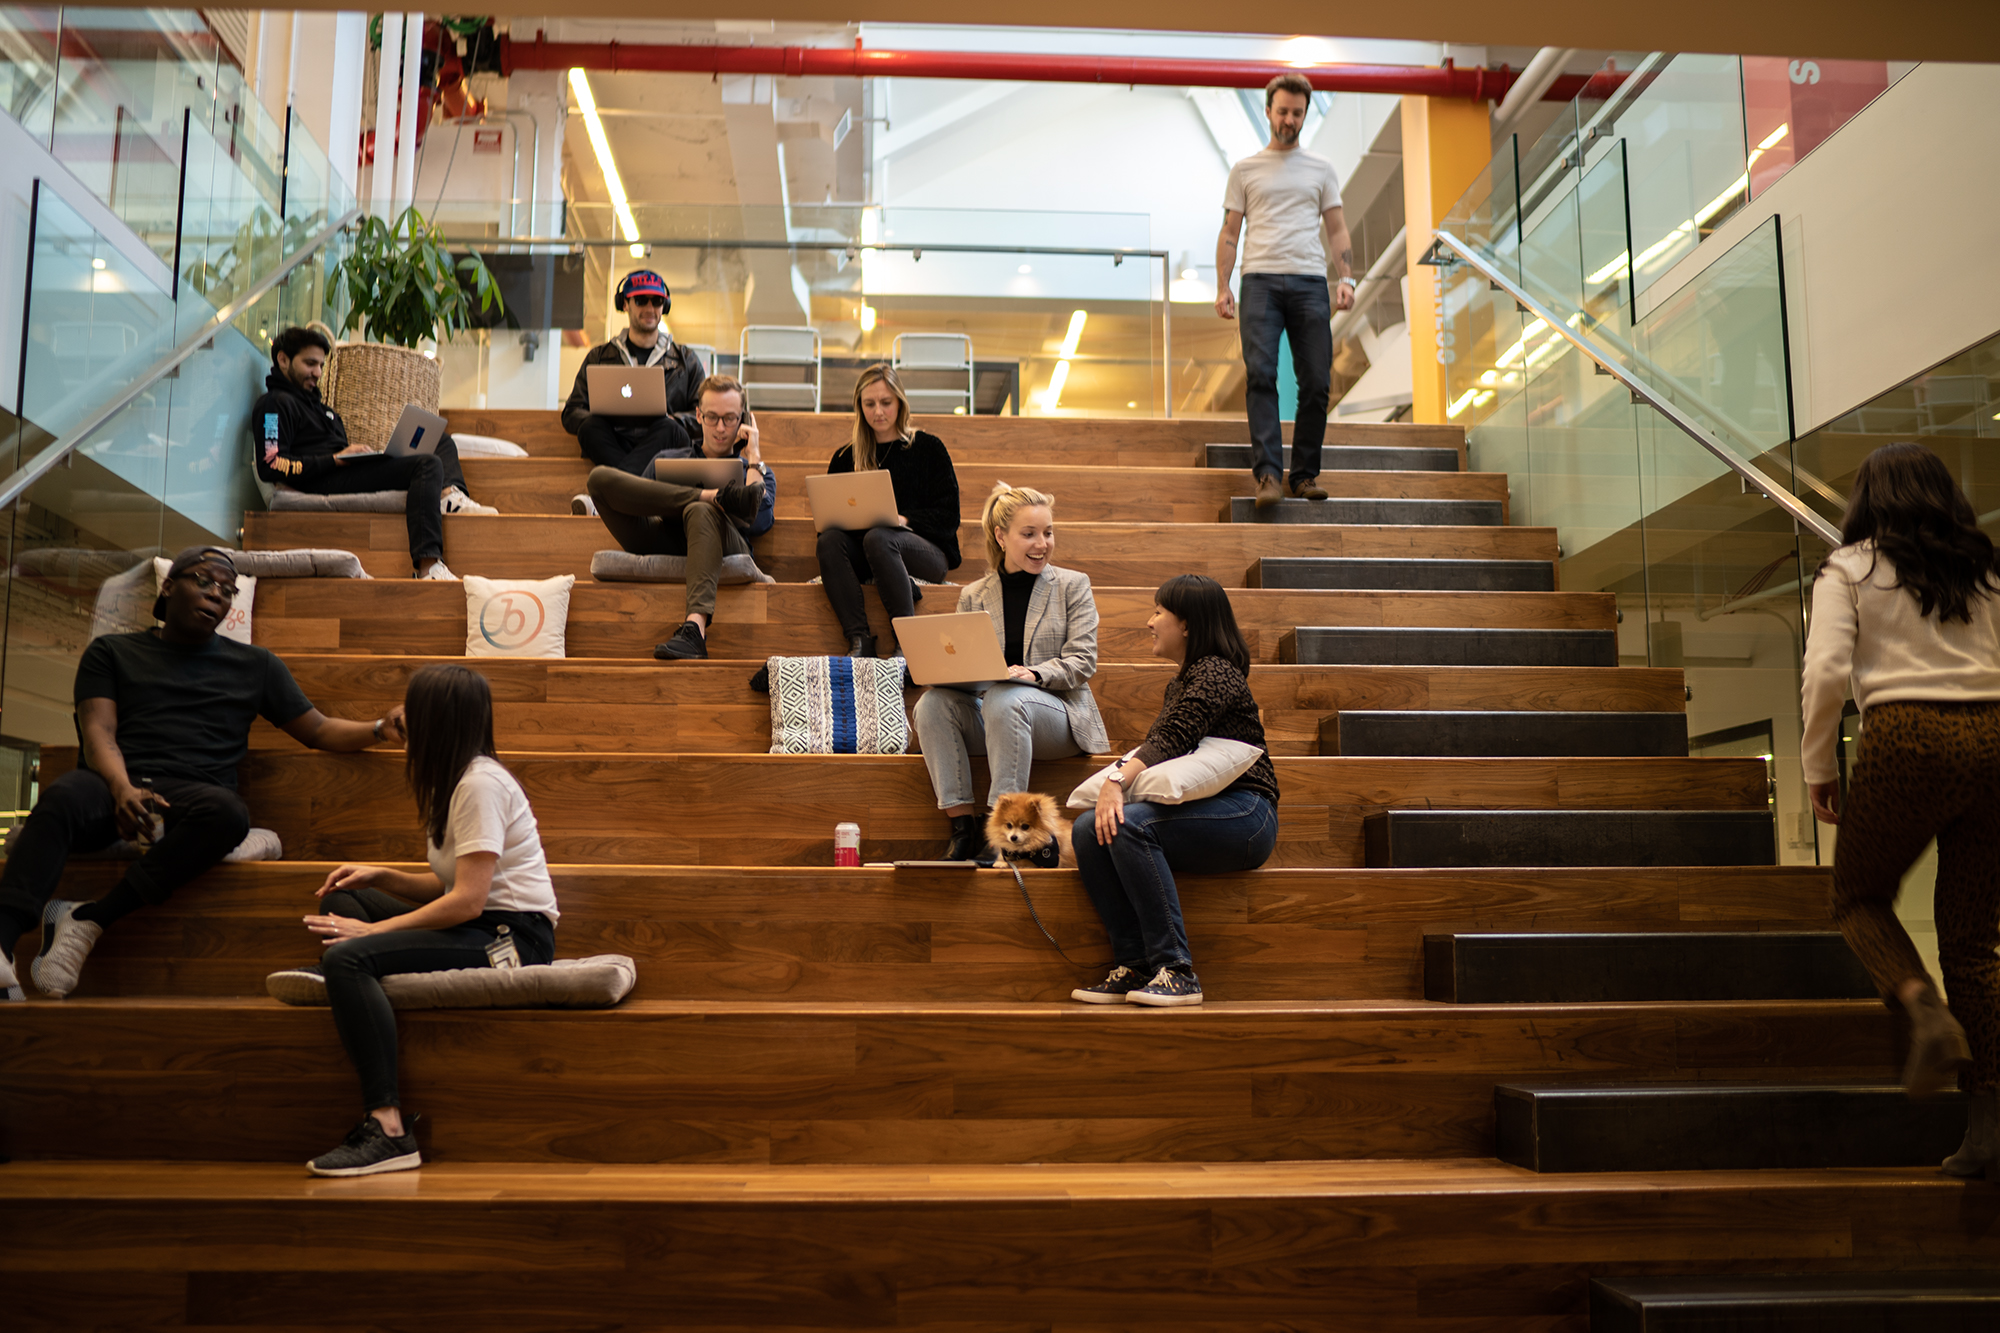 Employees sit with laptops along large wooden staircase, talking while working.